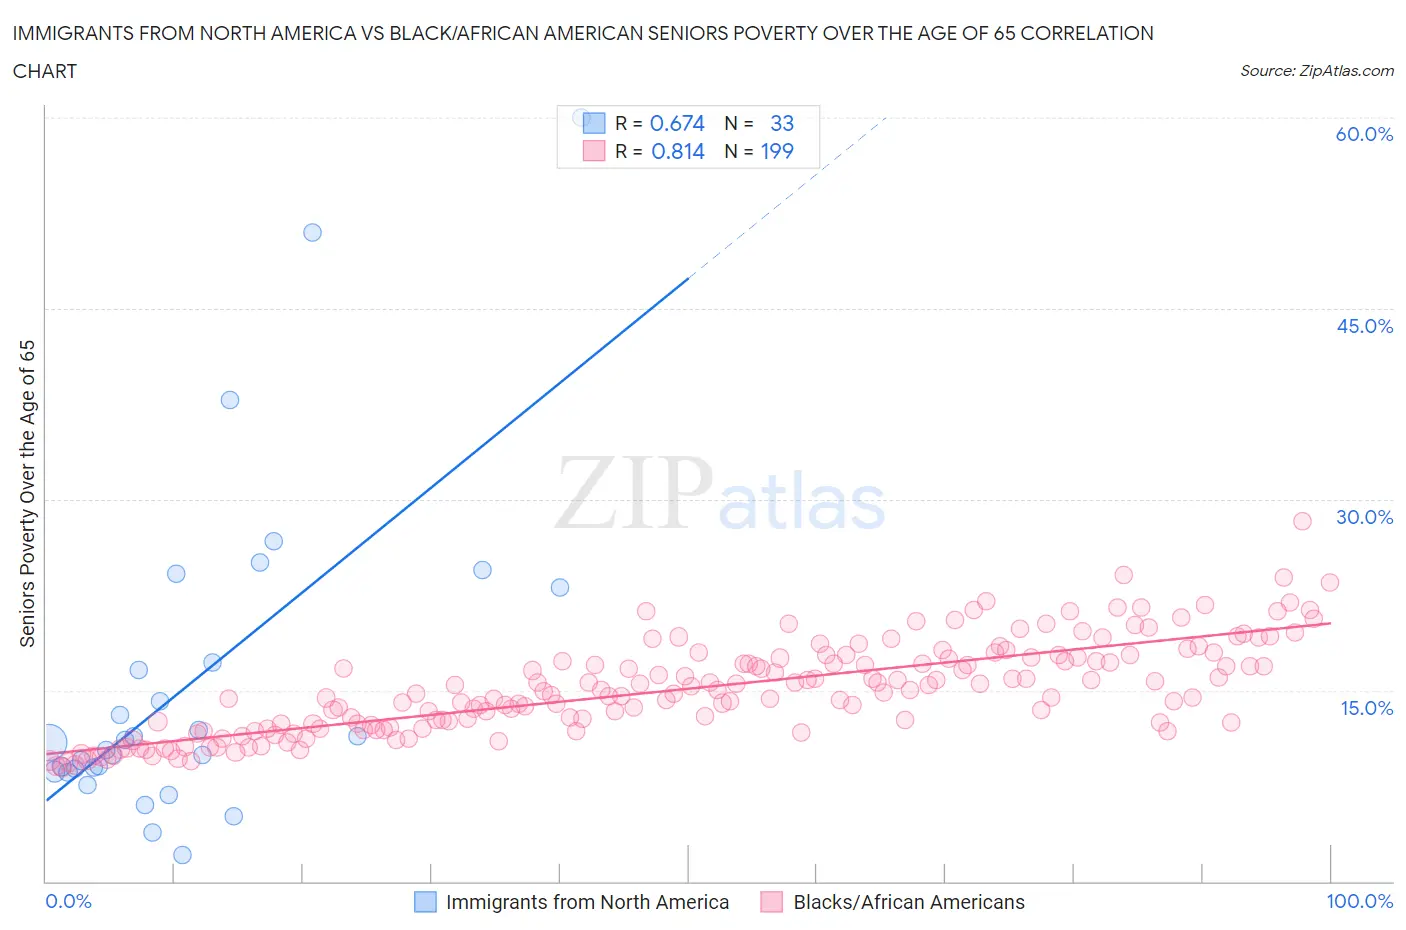 Immigrants from North America vs Black/African American Seniors Poverty Over the Age of 65